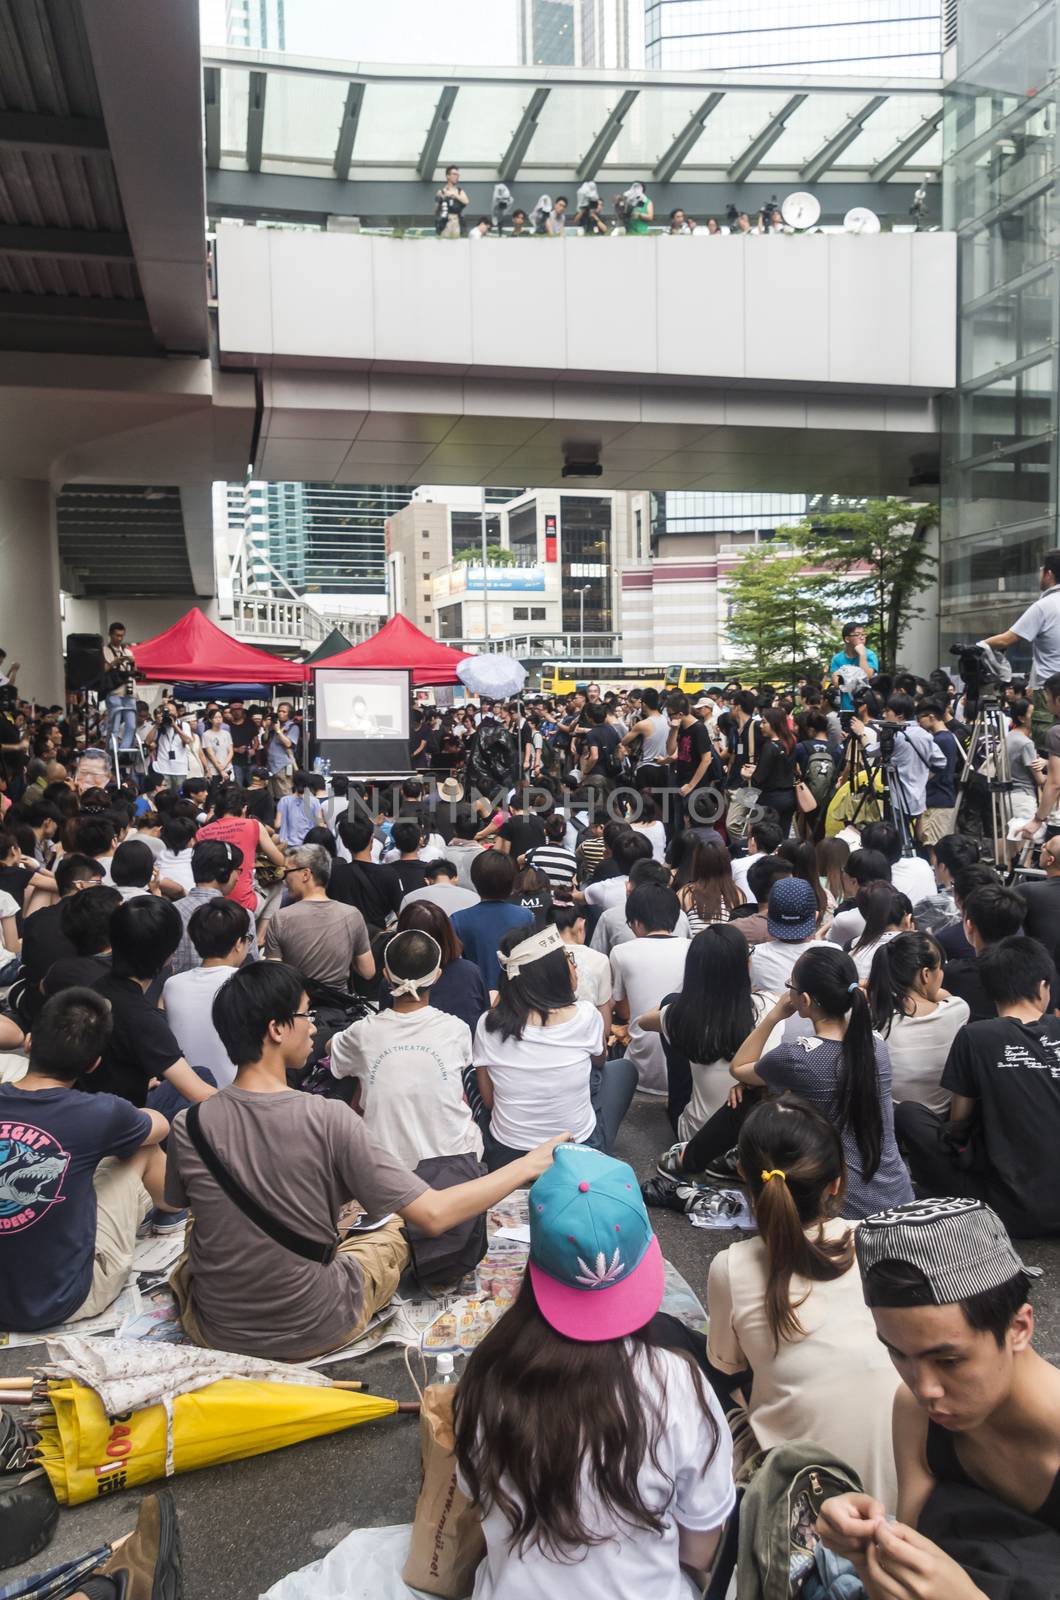 HONG KONG - JUNE 20: Protesters gathered outside the government headquarters on June 20, 2014 in Hong Kong. The Finance Committee meeting in the Legislative Council that is vetting an initial HK$340 million funding request to build two new towns in northeast New Territories in Hong Kong.